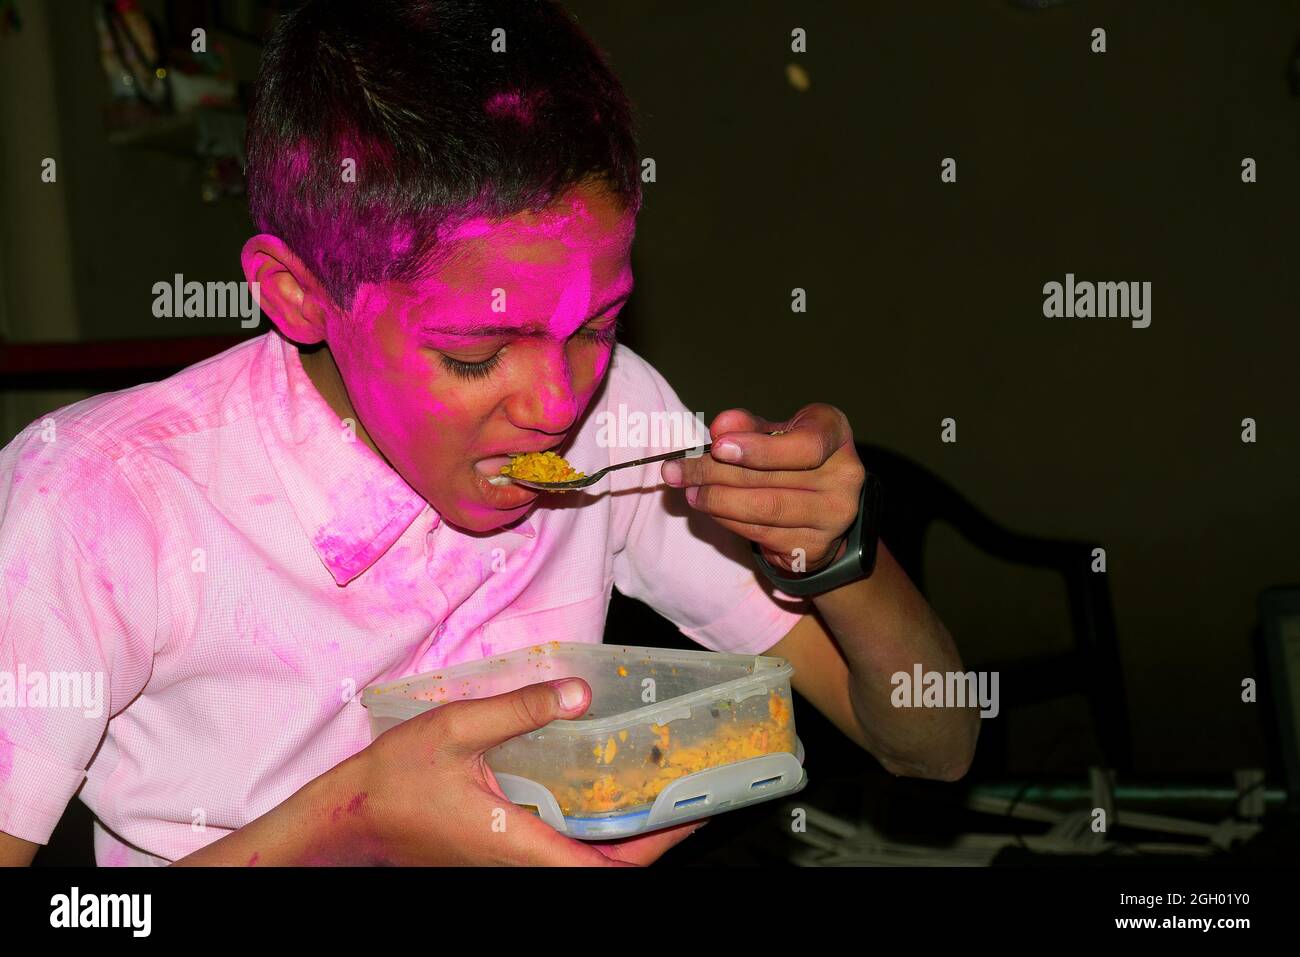 Boy with colorful face eating breakfast. Concept for Indian festival Holi Stock Photo